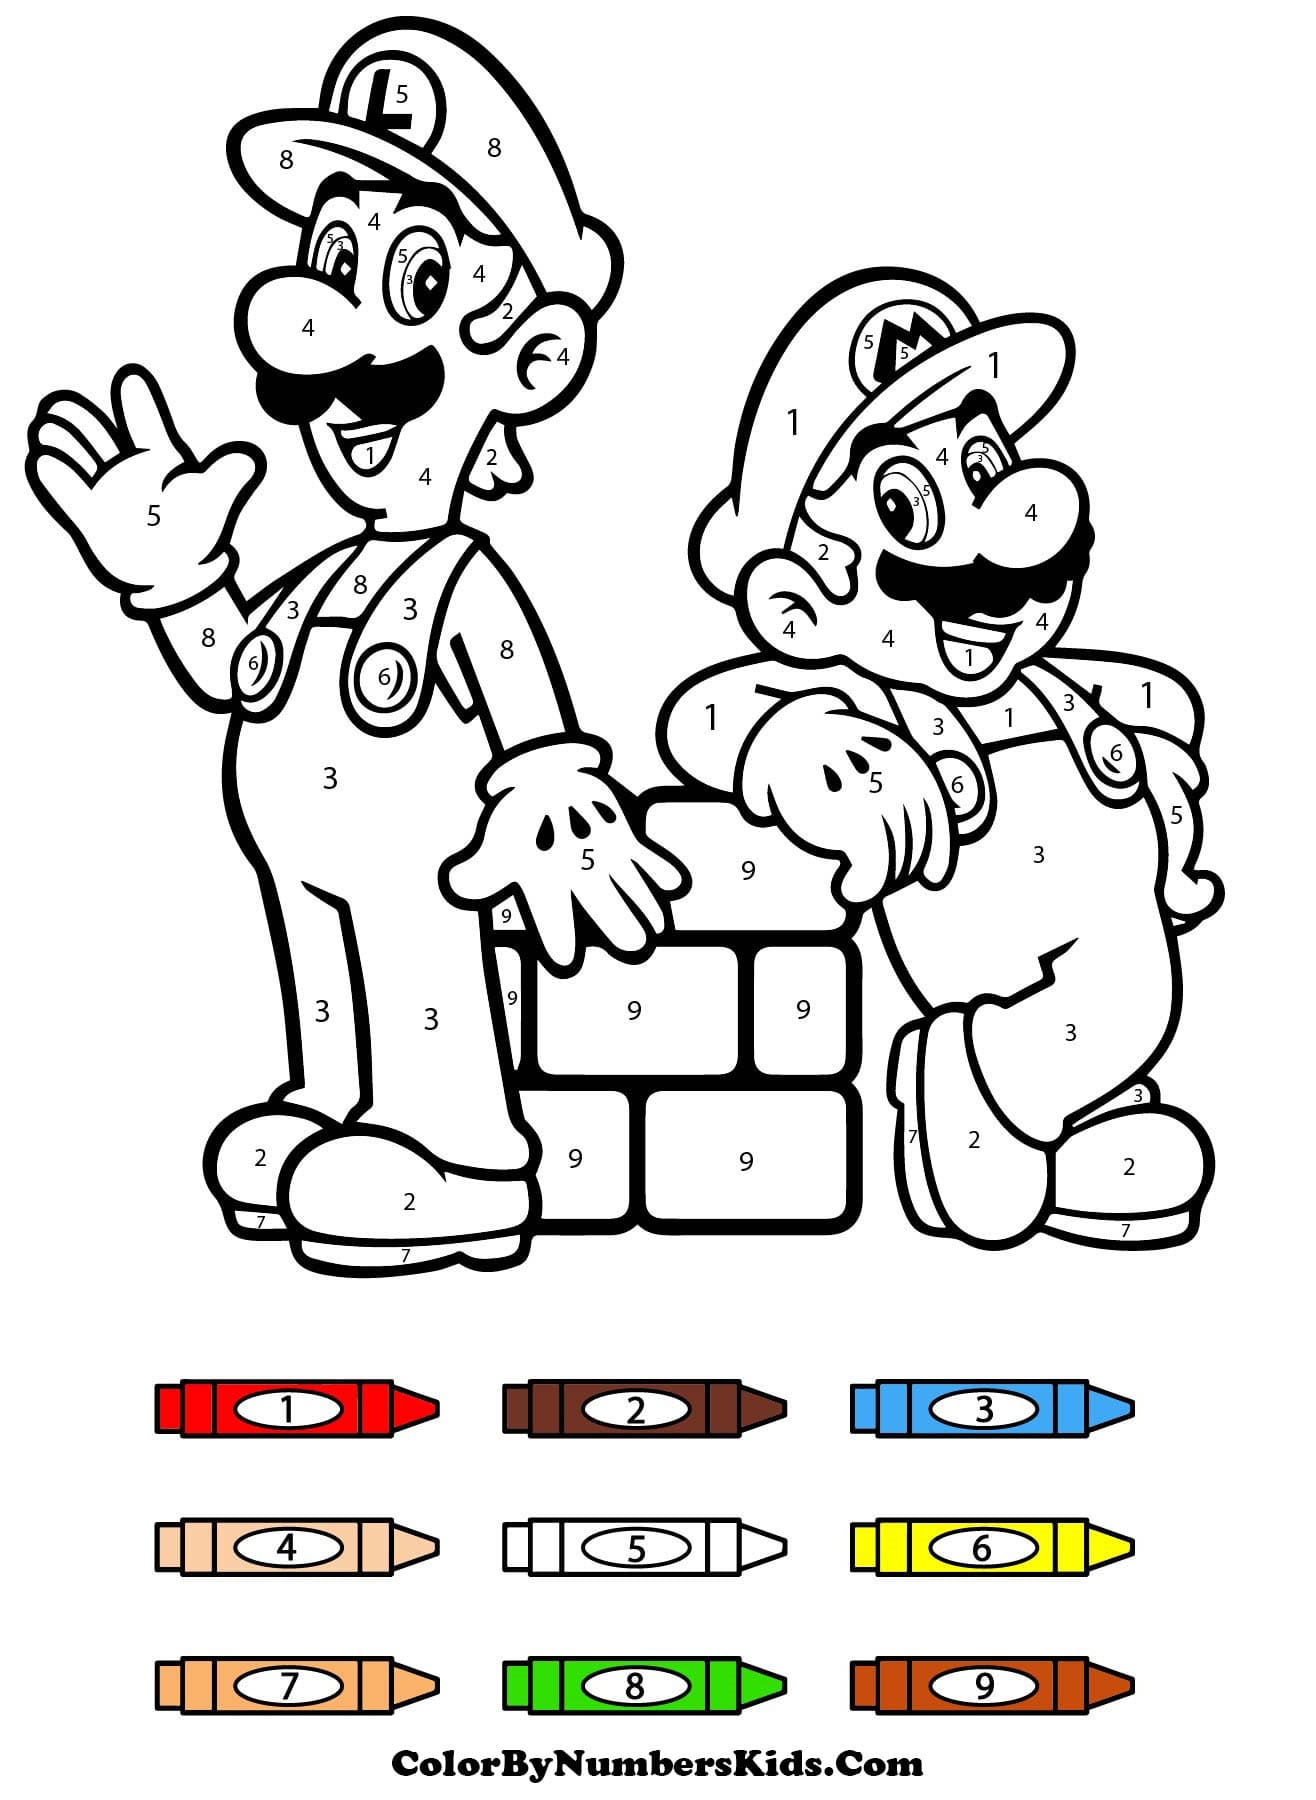 Luigi and Mario Color By Number